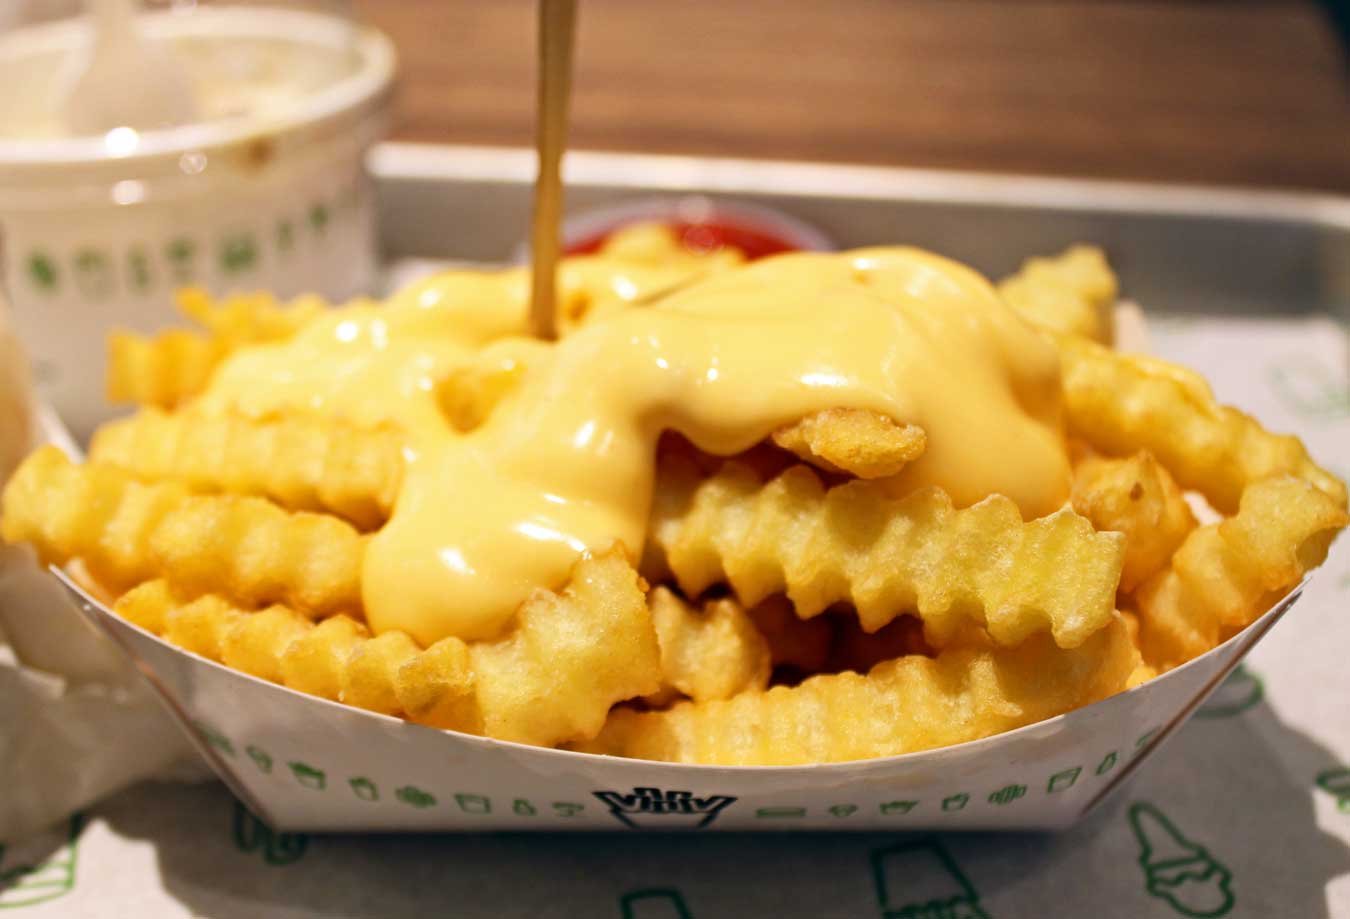 Cheese Fries at Shake Shack in Downtown Detroit /// Shake Shack Detroit Might Be Your New Favorite Burger Spot /// - From sandwiches, fries, and shakes to local flavors and an awesome location, learn why long-time fans and newbies alike are sure to love the new Shake Shack in Downtown Detroit, Michigan. /// via Wading in Big Shoes